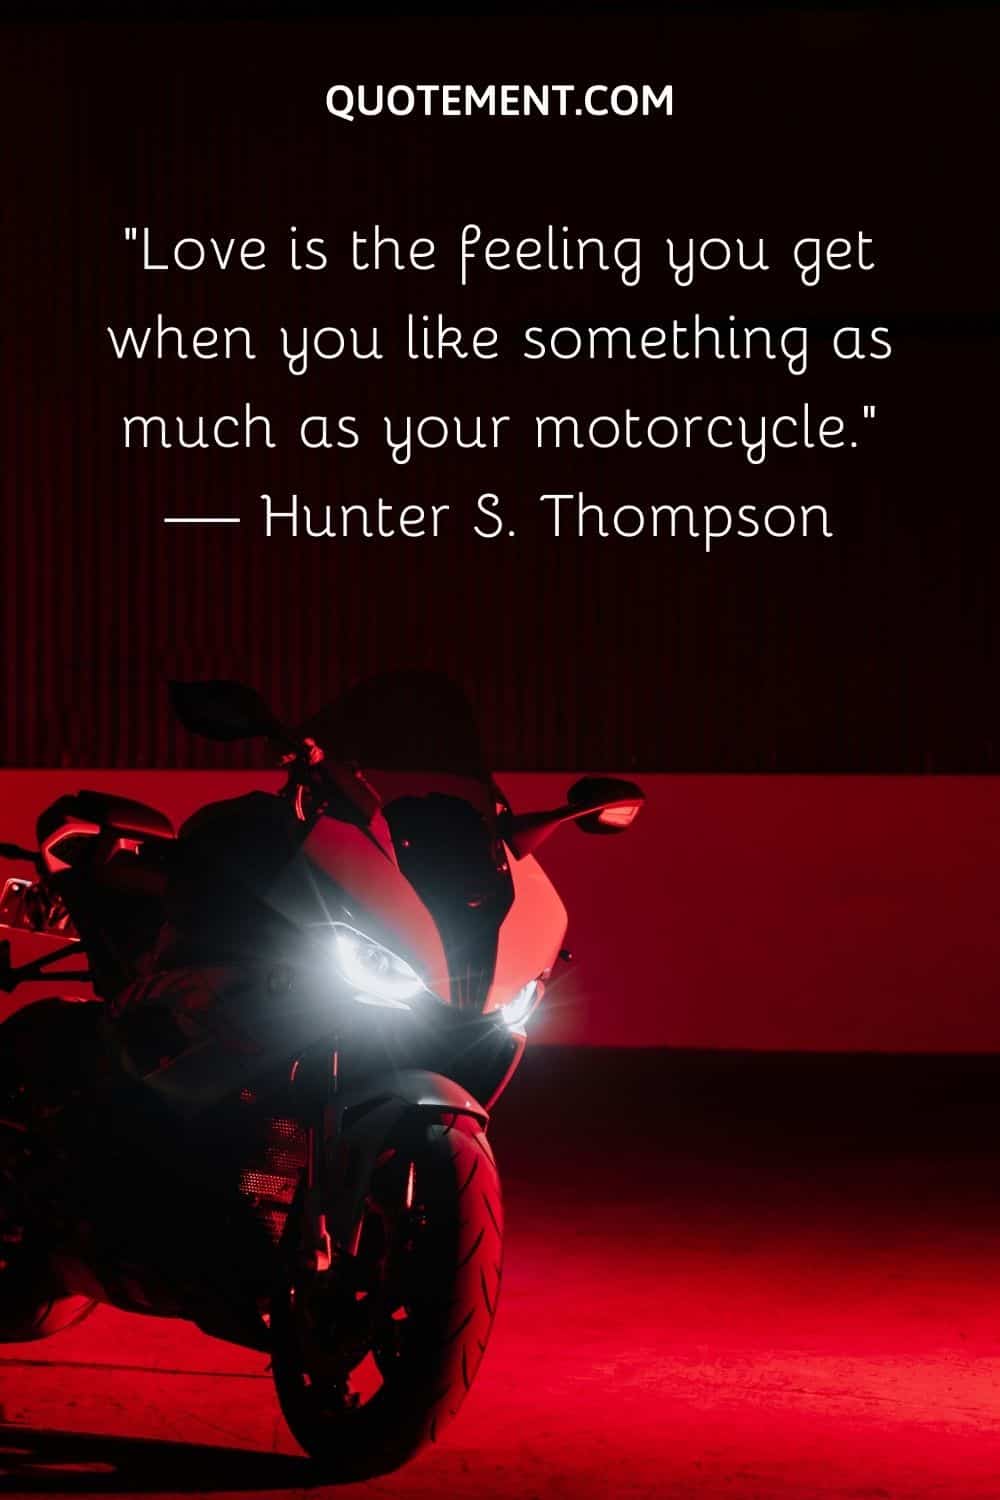 Love is the feeling you get when you like something as much as your motorcycle.